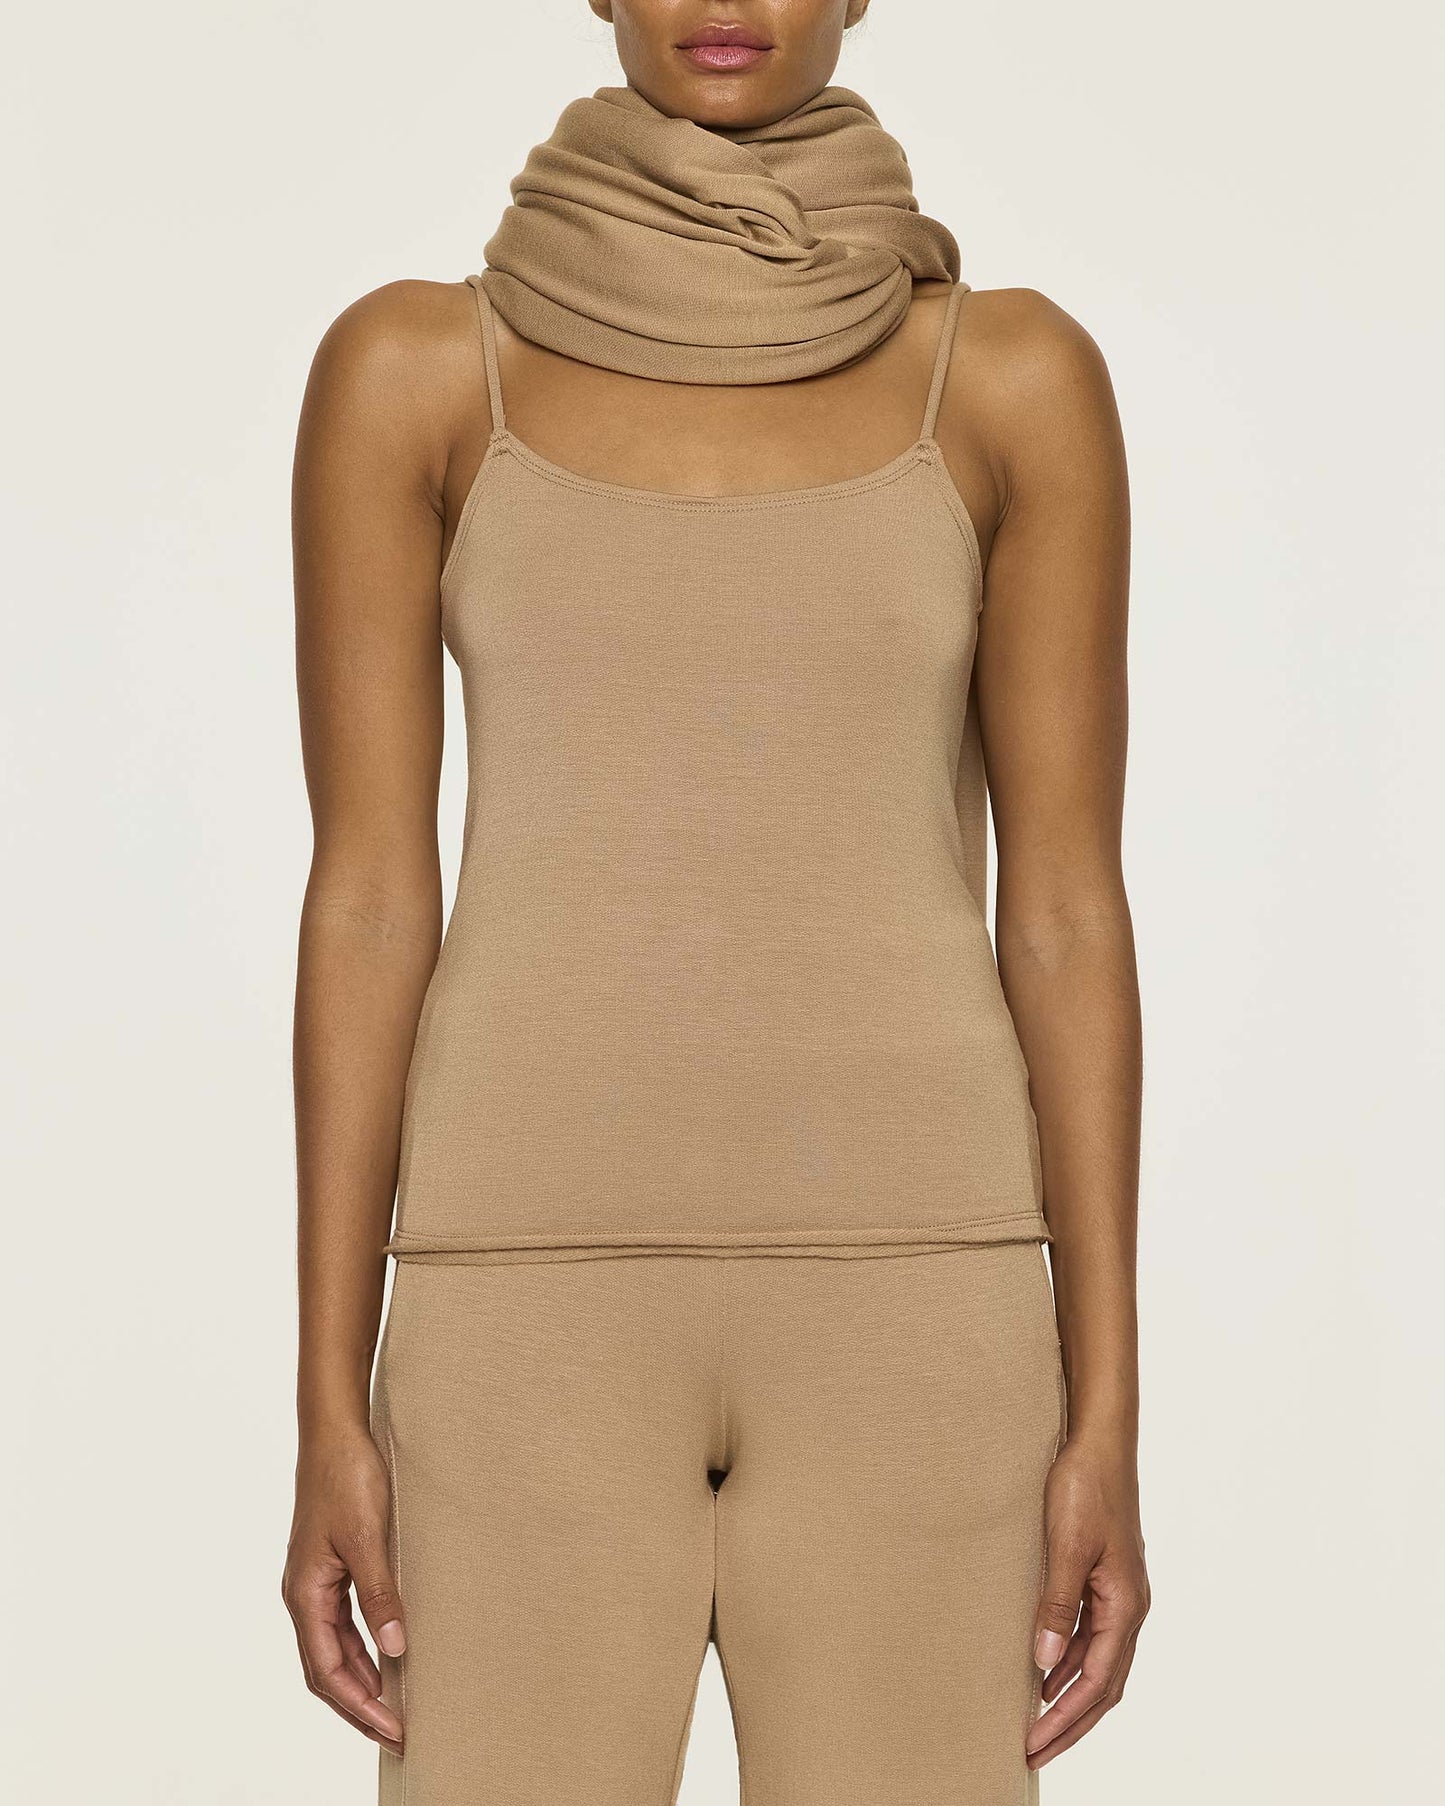 Camel | Tan Beige Scarf Wrap Long Soft Material